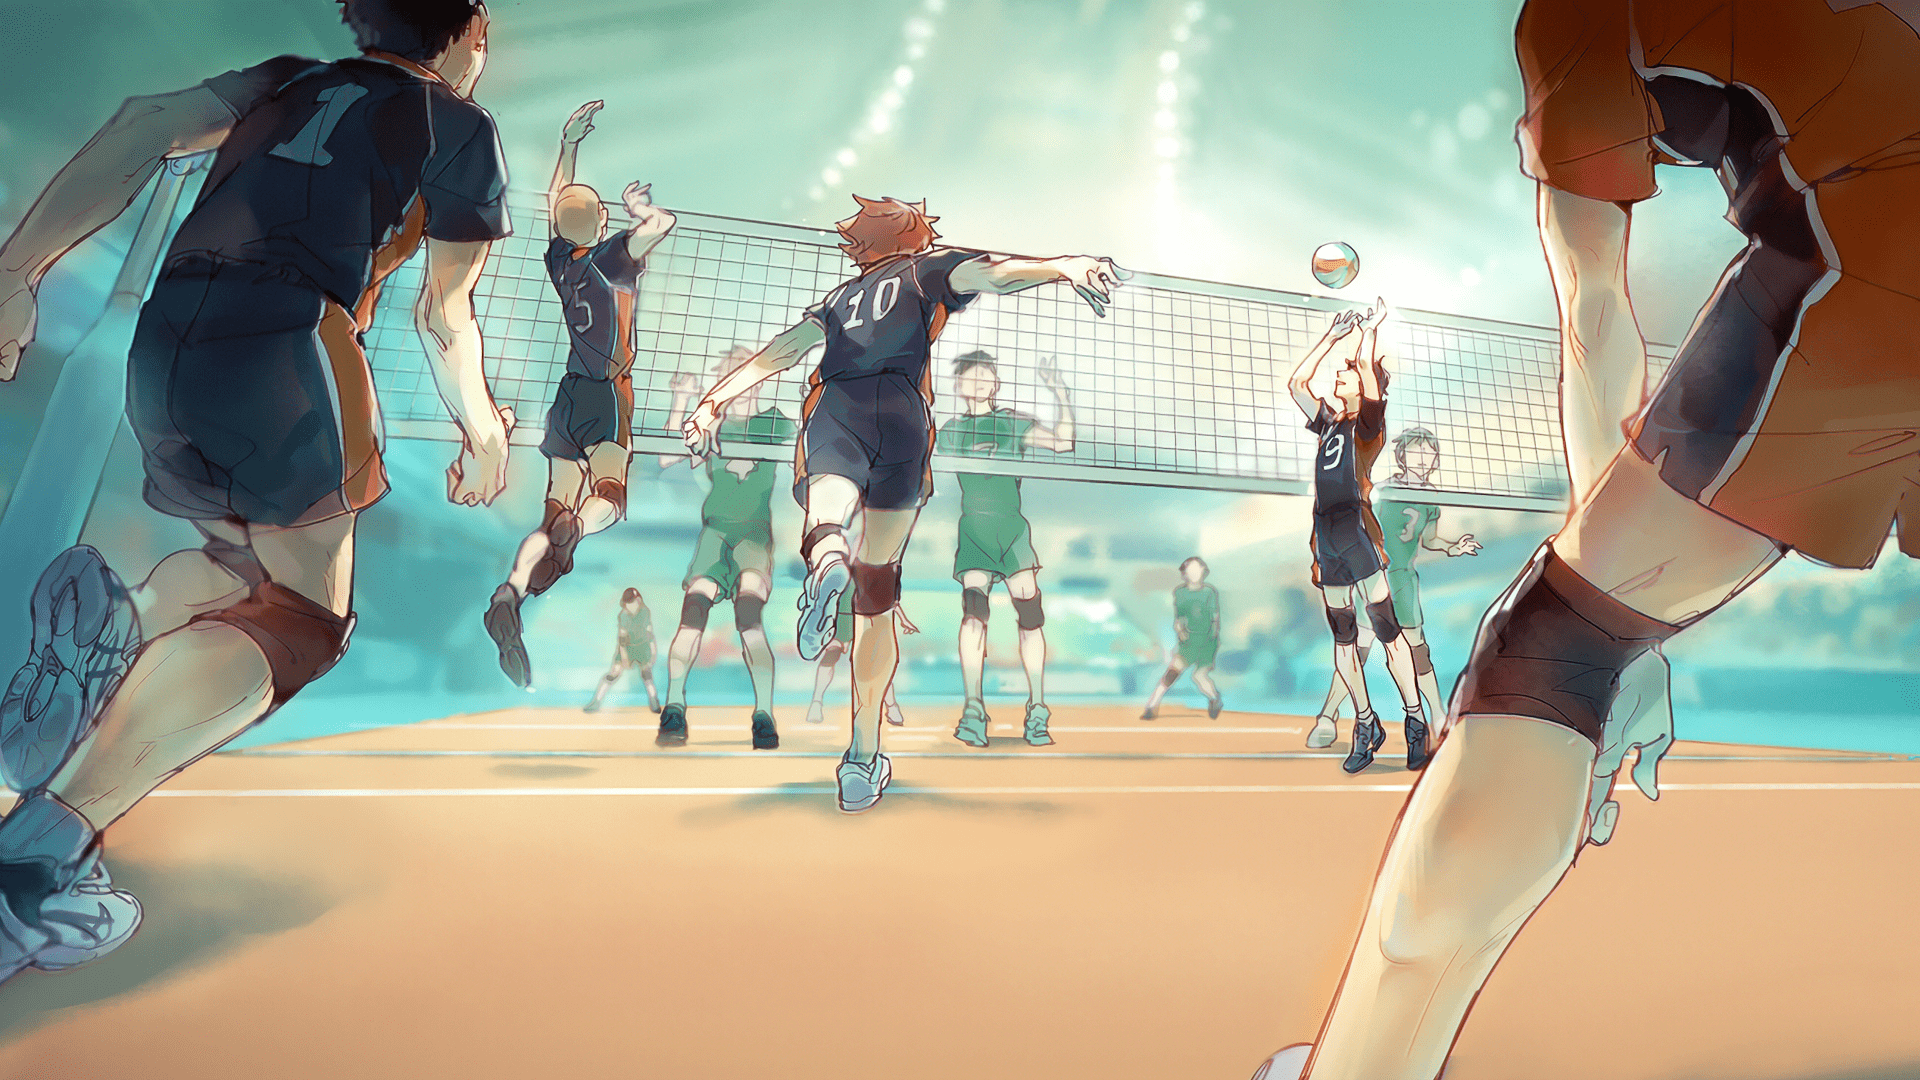 Download Cute Anime Volleyball Player Wallpaper | Wallpapers.com